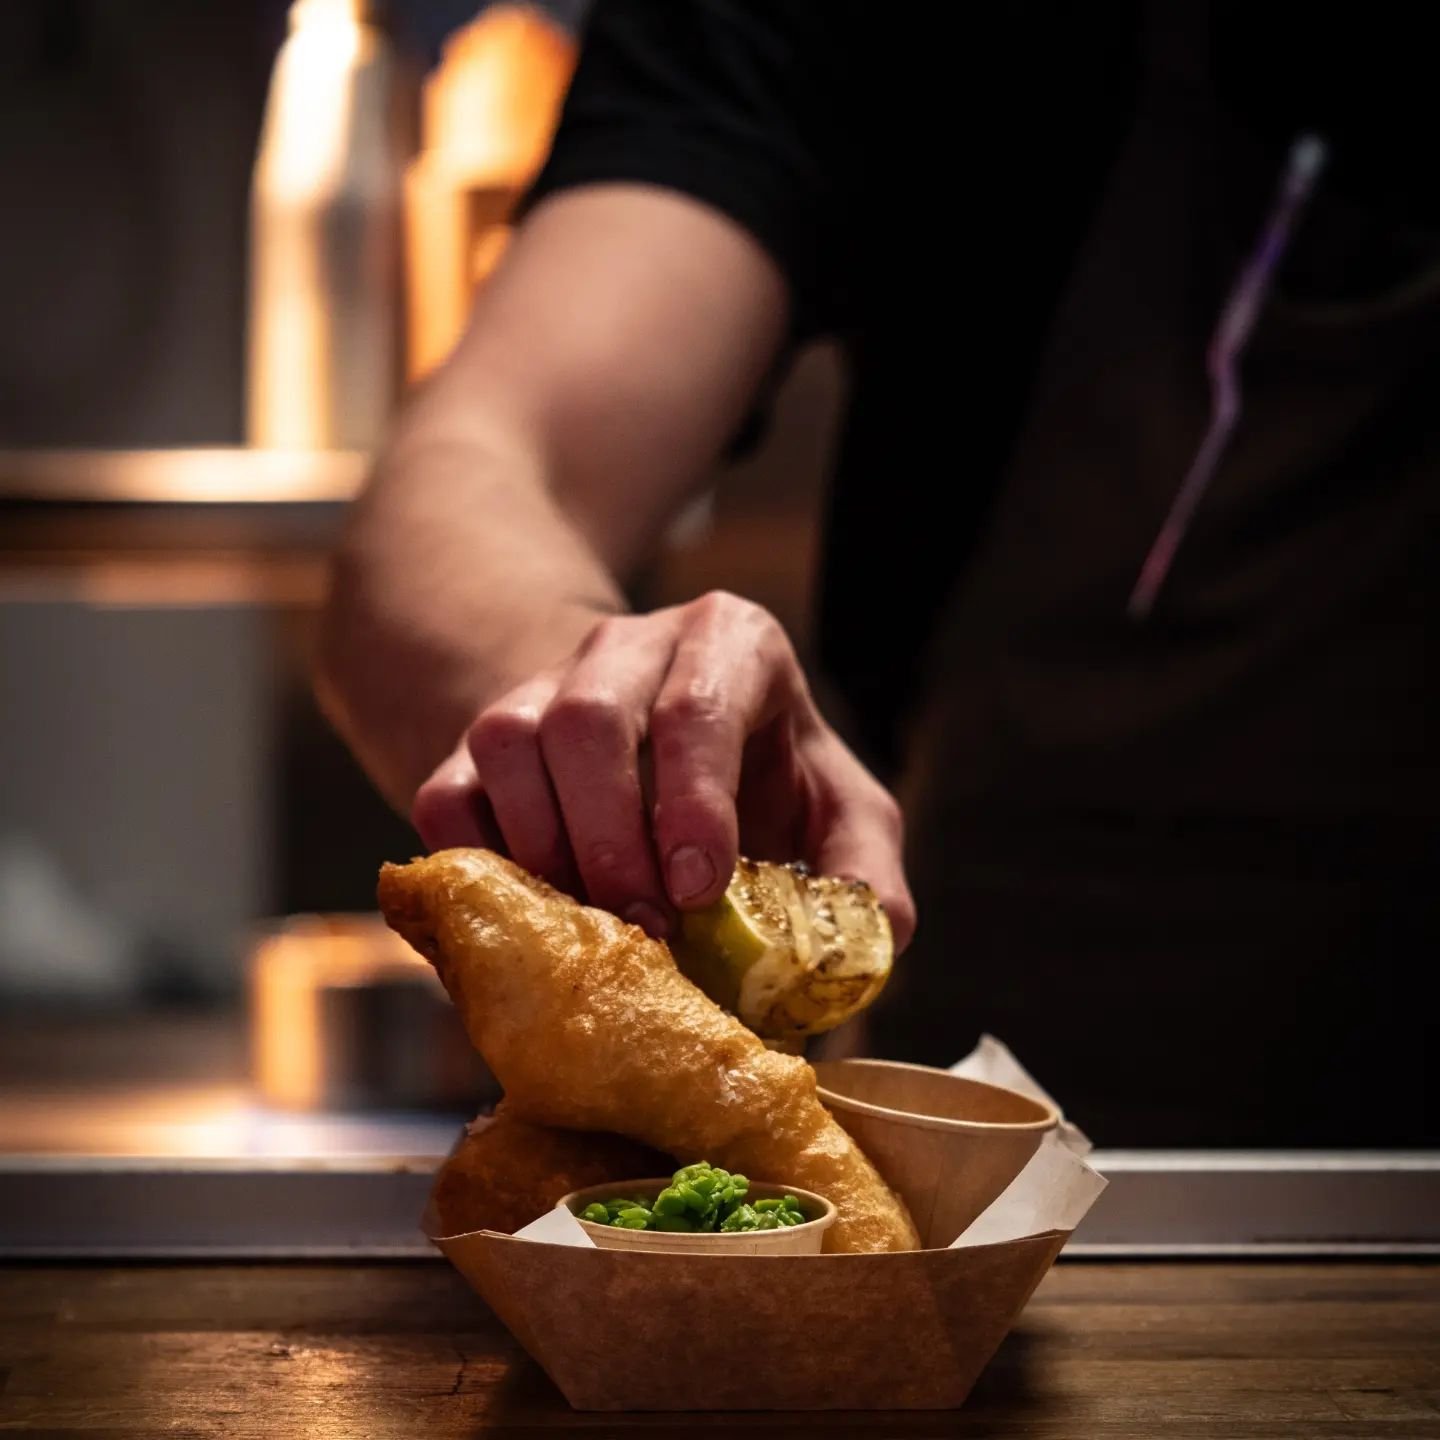 Feeling fishy today? Swing by @edinburgh_streetfood and try the best fish &amp; chips in town 😉 

Only at JUNK

#edinburgh #streetfood #fishandchips #weekendvibes #spring